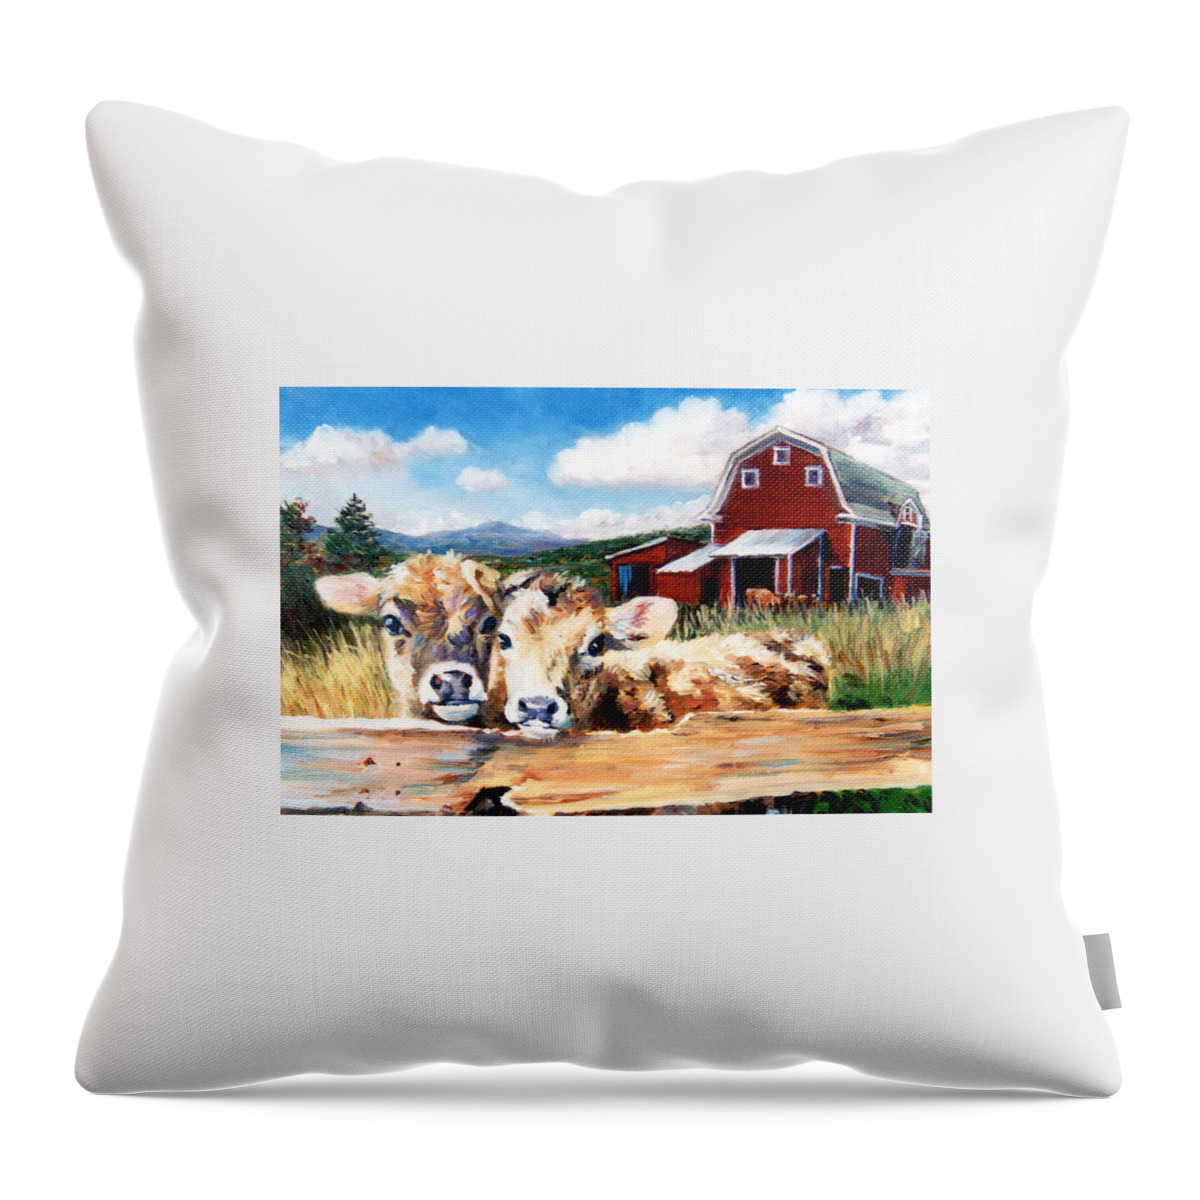 Cows Throw Pillow featuring the painting Calves by Marie Witte